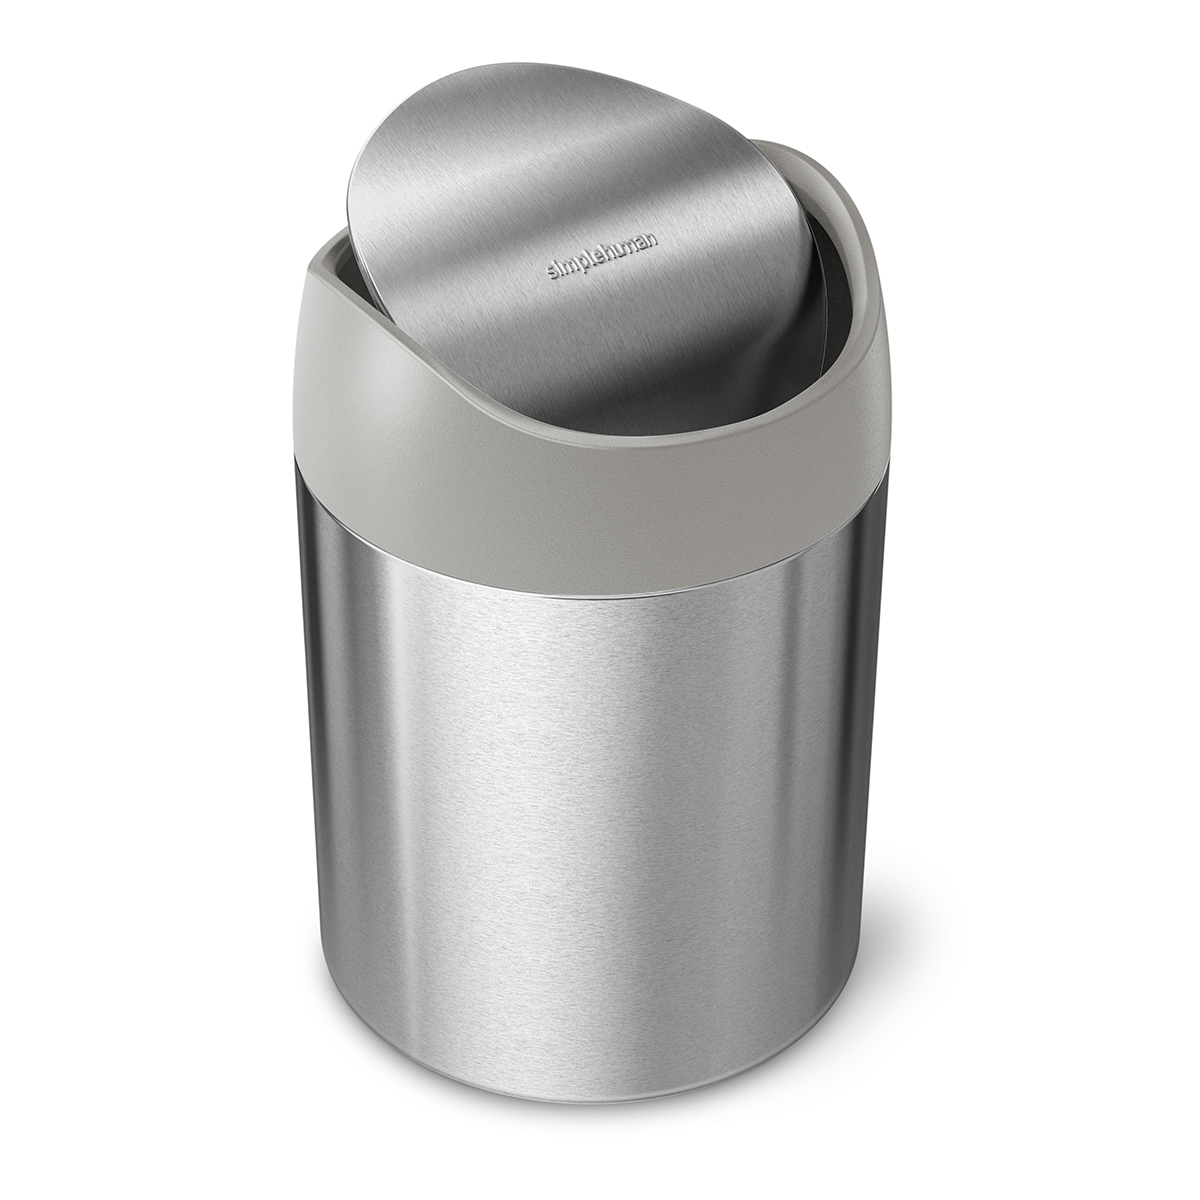 https://www.containerstore.com/catalogimages/481365/10065723-grey-Mini-Countertop-can-VE.jpg